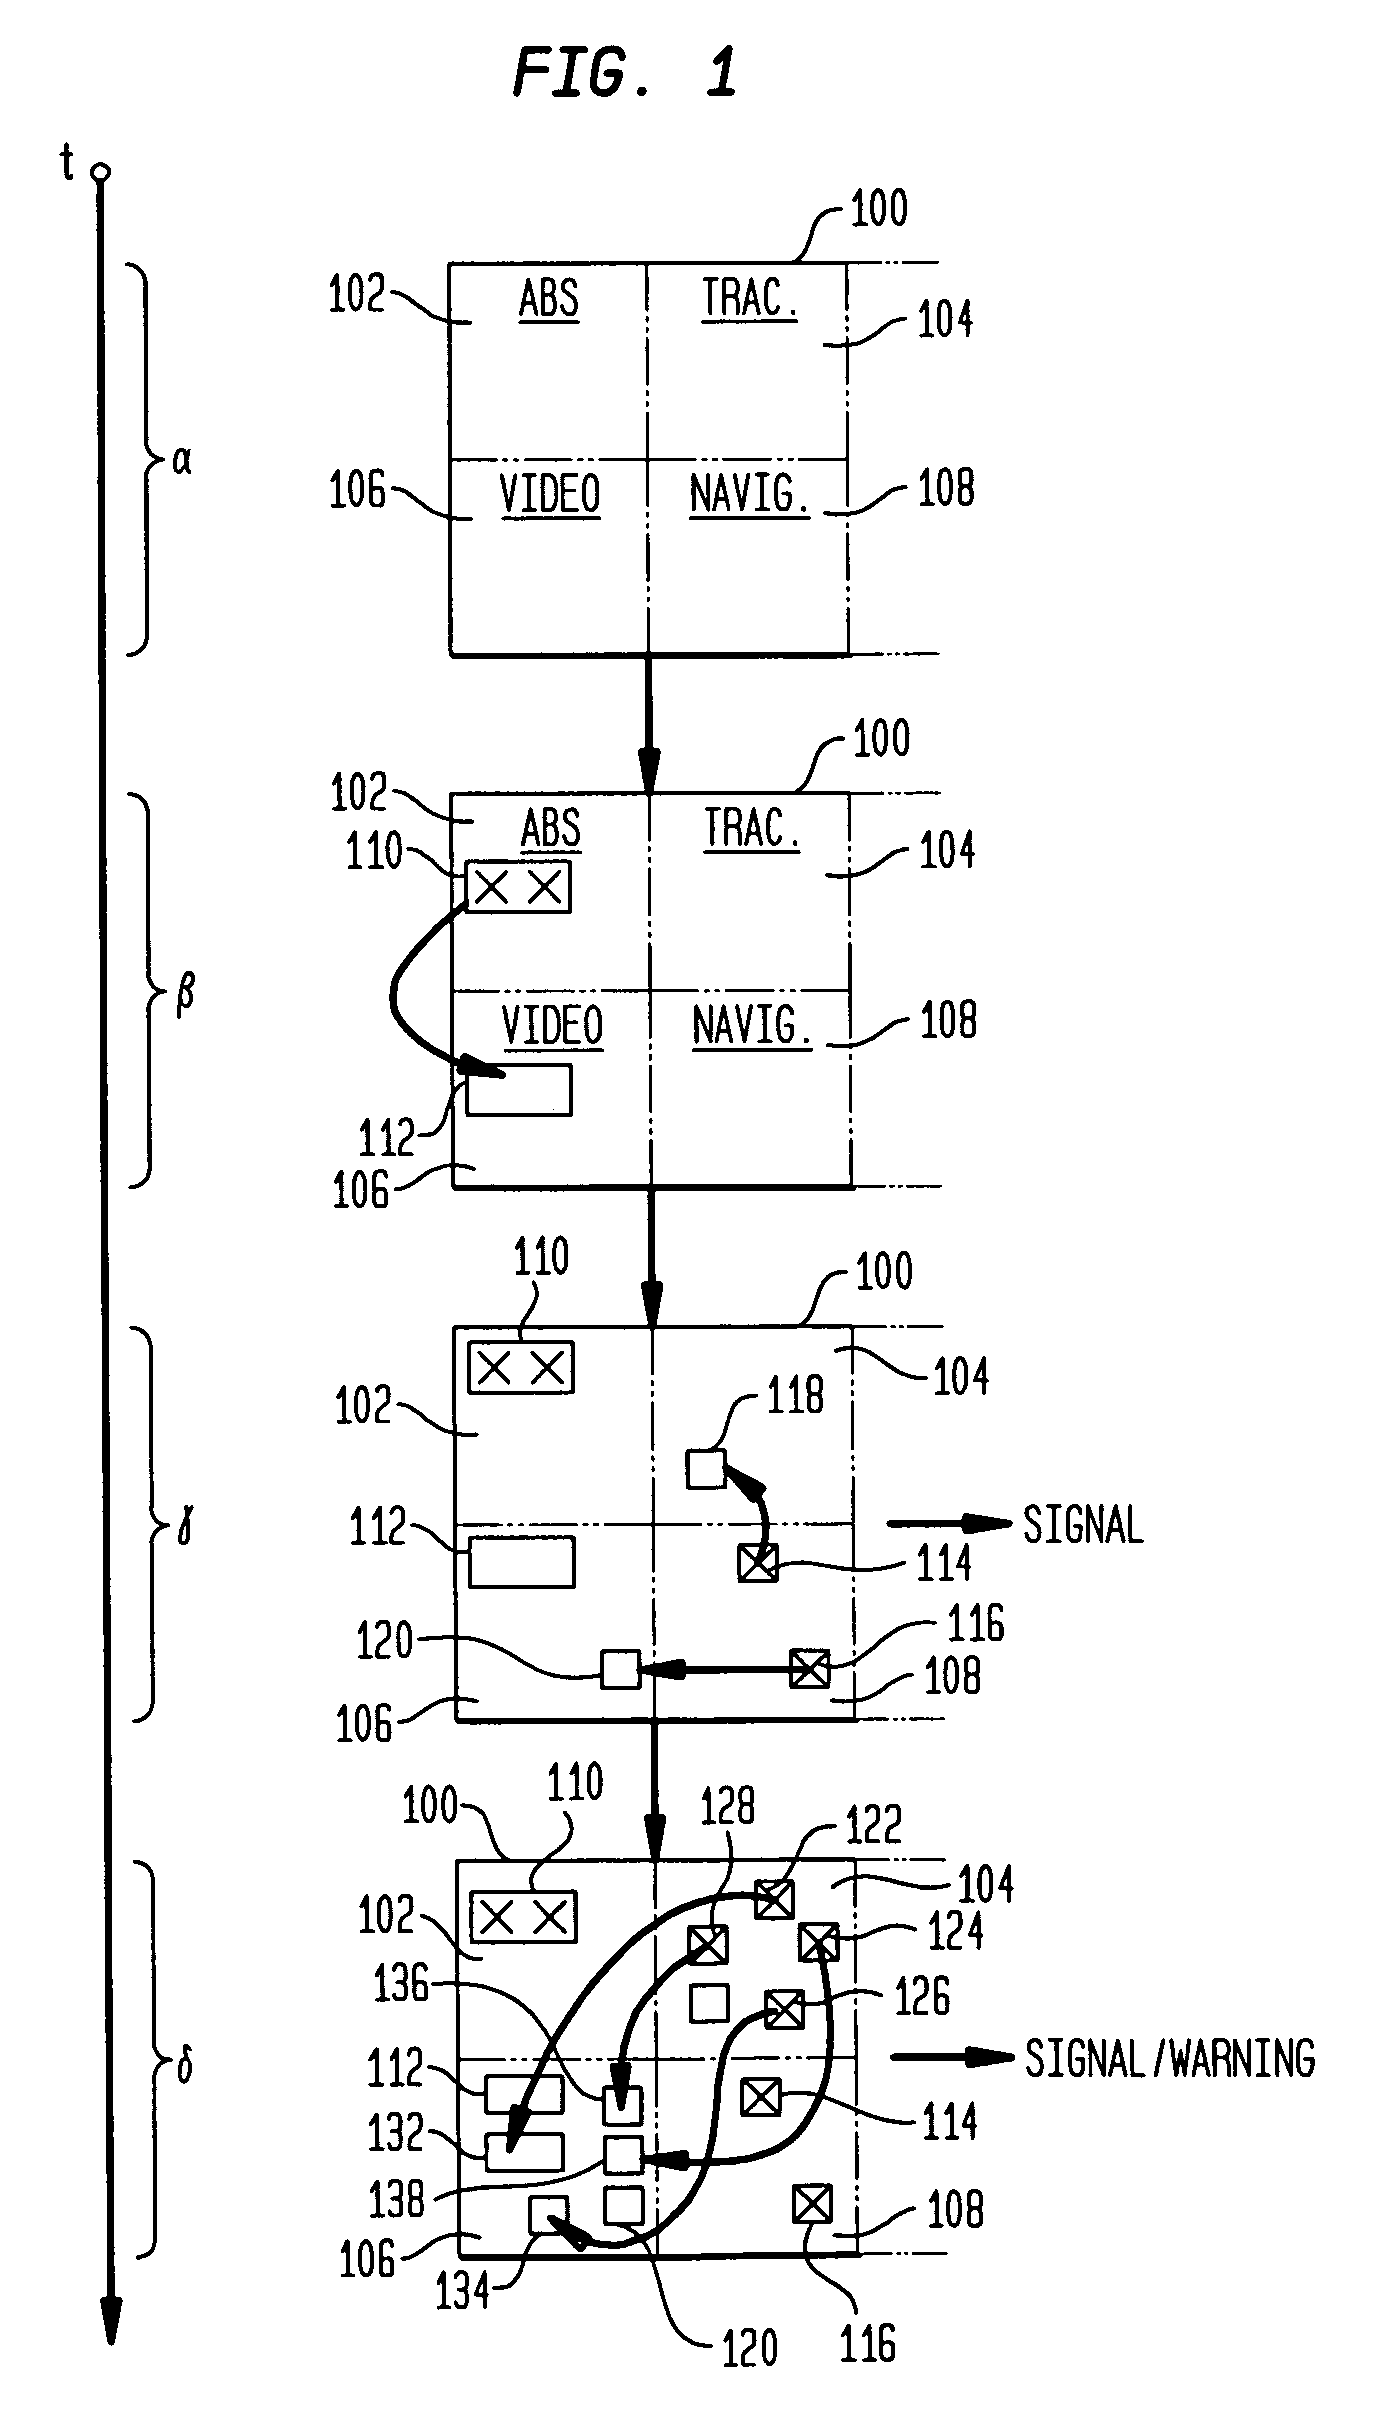 Resilient integrated circuit architecture